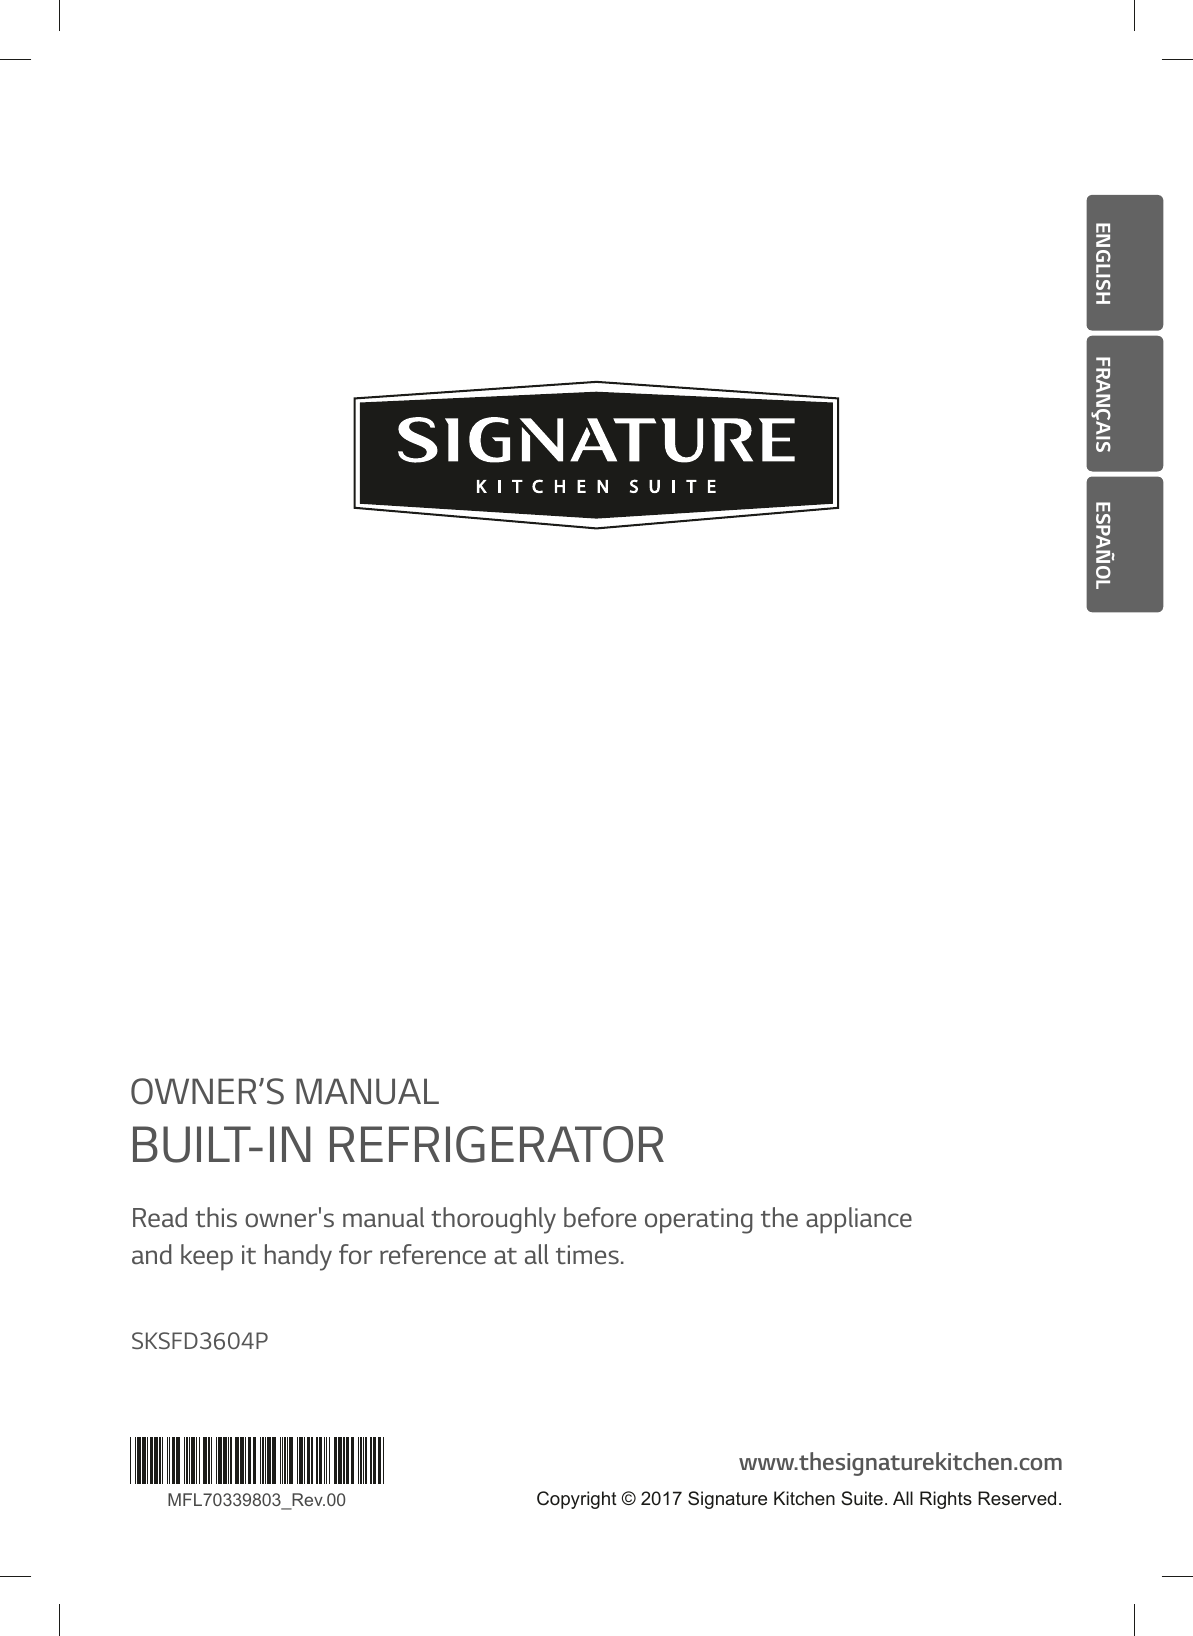 ENGLISH FRANÇAIS ESPAÑOLMFL70339803_Rev.00OWNER’S MANUALBUILT-IN REFRIGERATORRead this owner&apos;s manual thoroughly before operating the appliance  and keep it handy for reference at all times.www.thesignaturekitchen.comSKSFD3604PCopyright © 2017 Signature Kitchen Suite. All Rights Reserved.